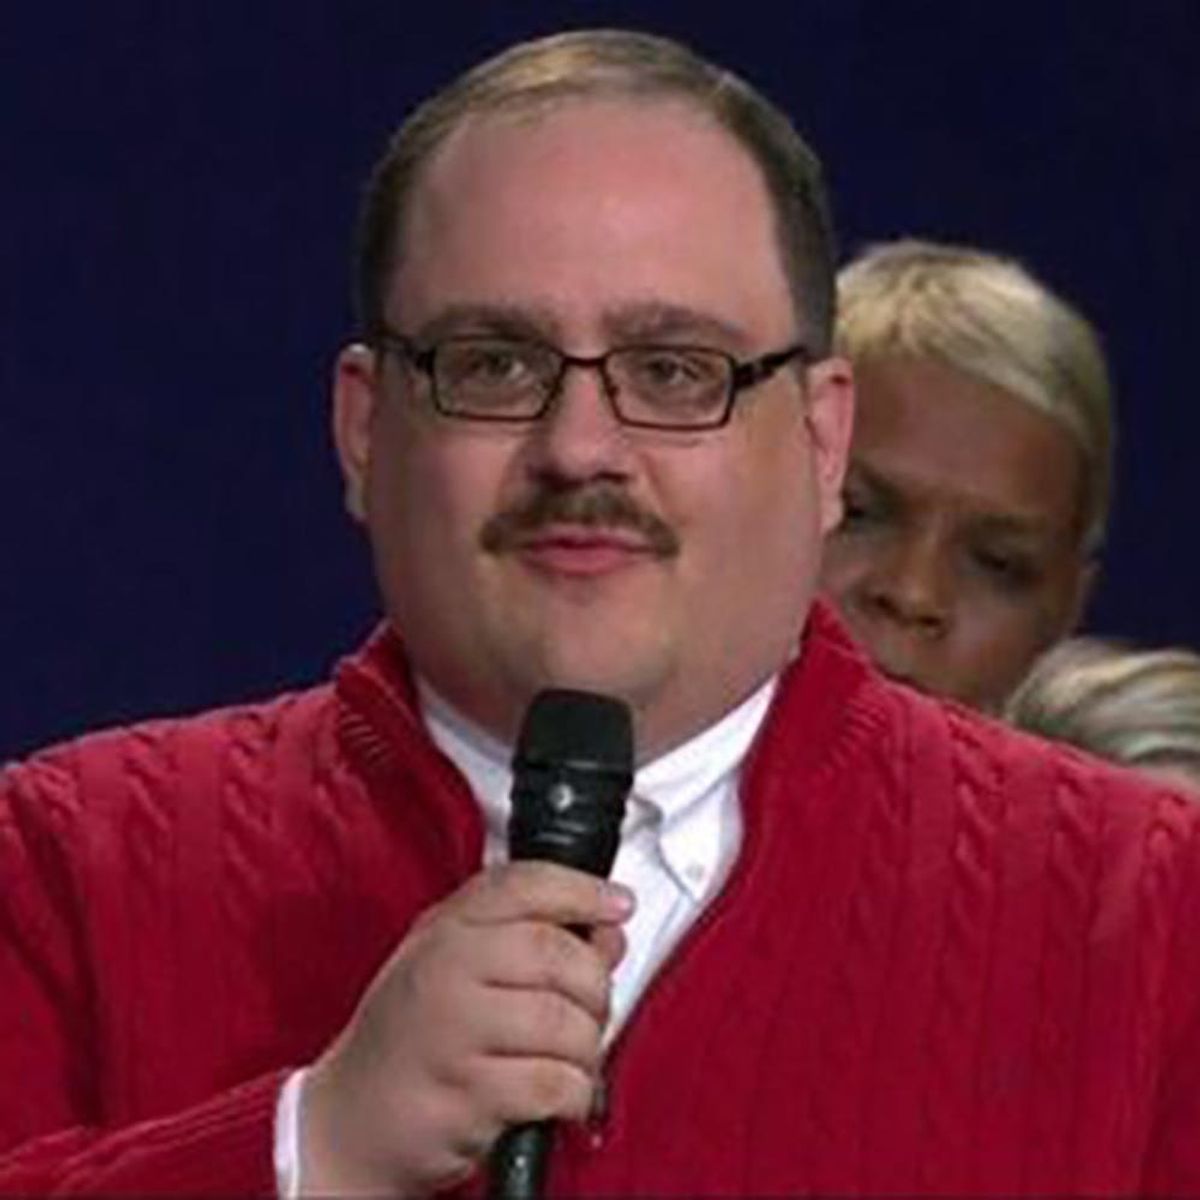 Kenneth Bone’s Sweater Is the Topical Costume of Halloween 2016